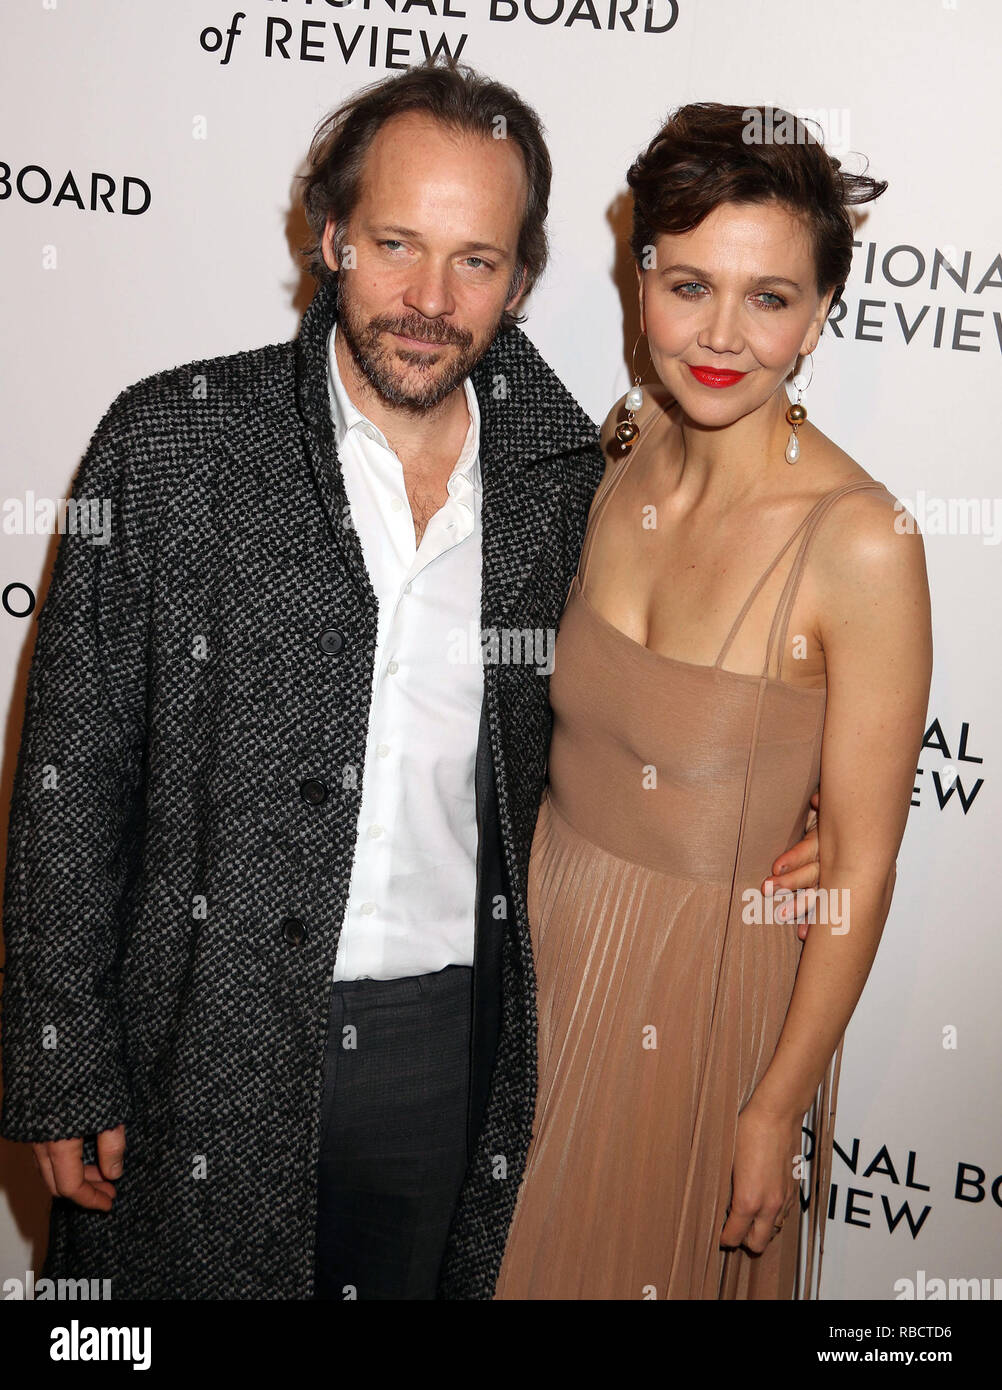 New York City, New York, USA. 8th Jan, 2019. Actress MAGGIE GYLLENHAAL and her husband/actor PETER SARSGAARD attend the 2019 National Board of Review Annual Awards Gala held at Cipriani 42nd Street. Credit: Nancy Kaszerman/ZUMA Wire/Alamy Live News Stock Photo